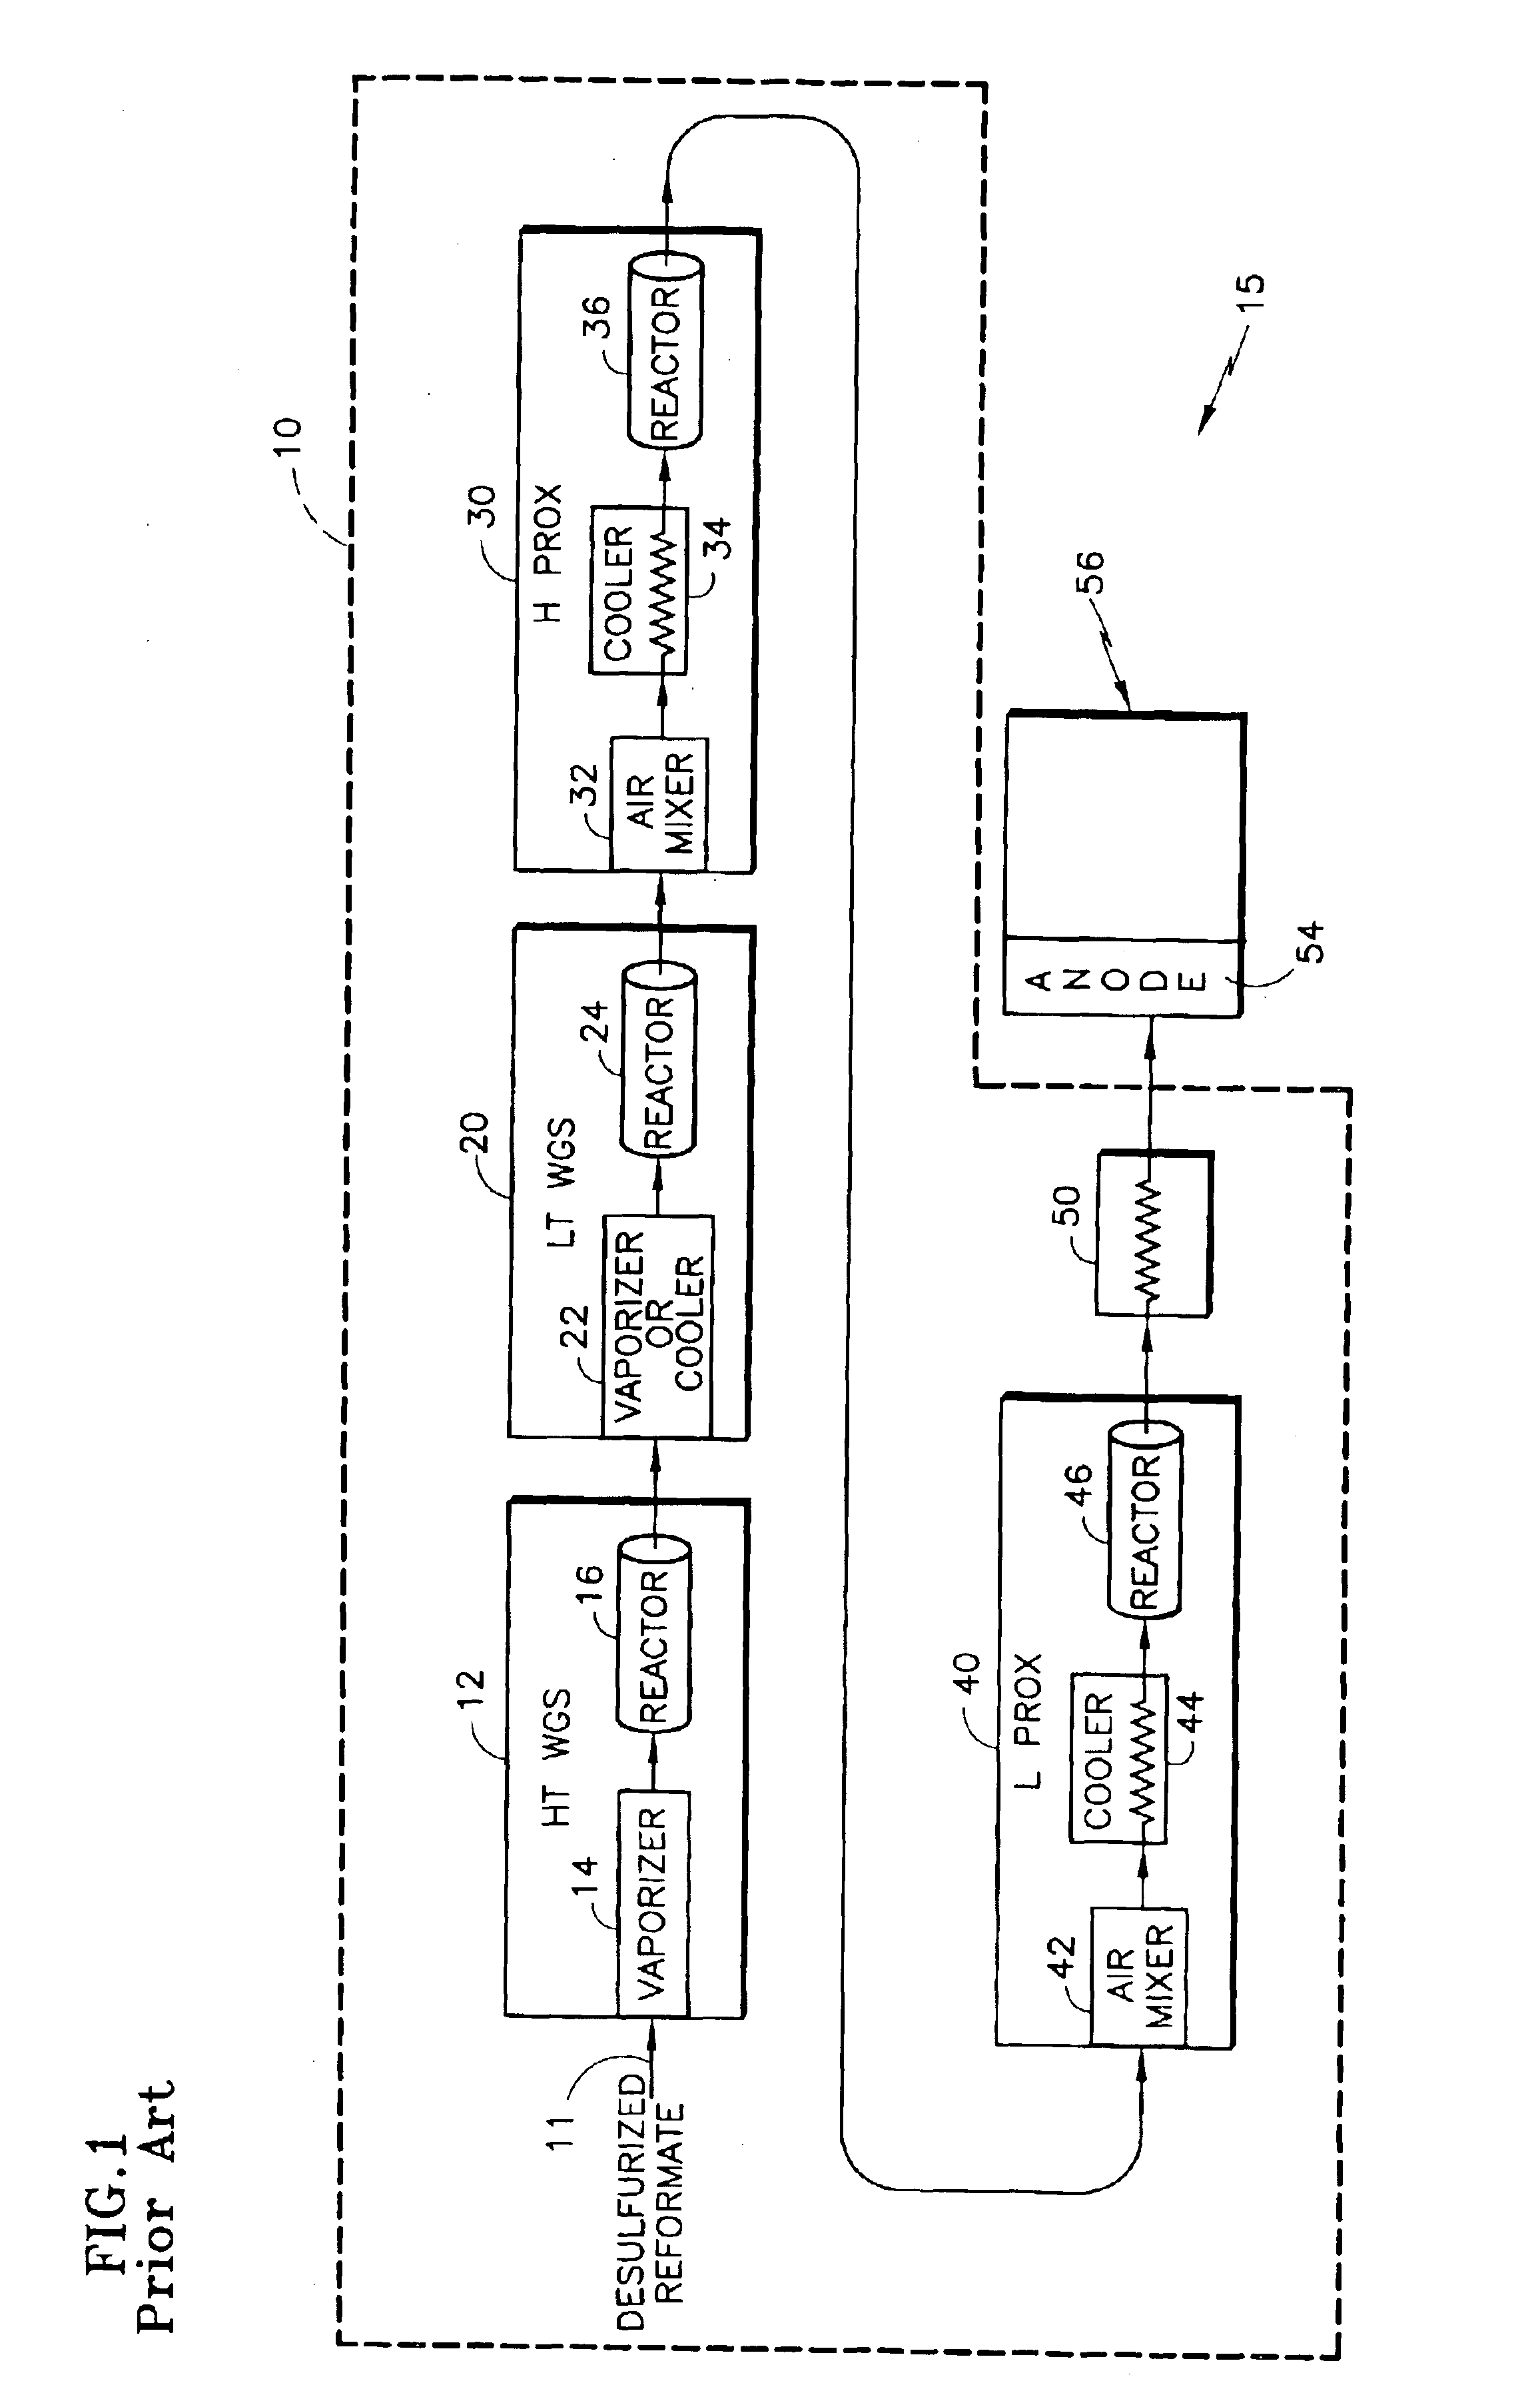 High performance fuel processing system for fuel cell power plant